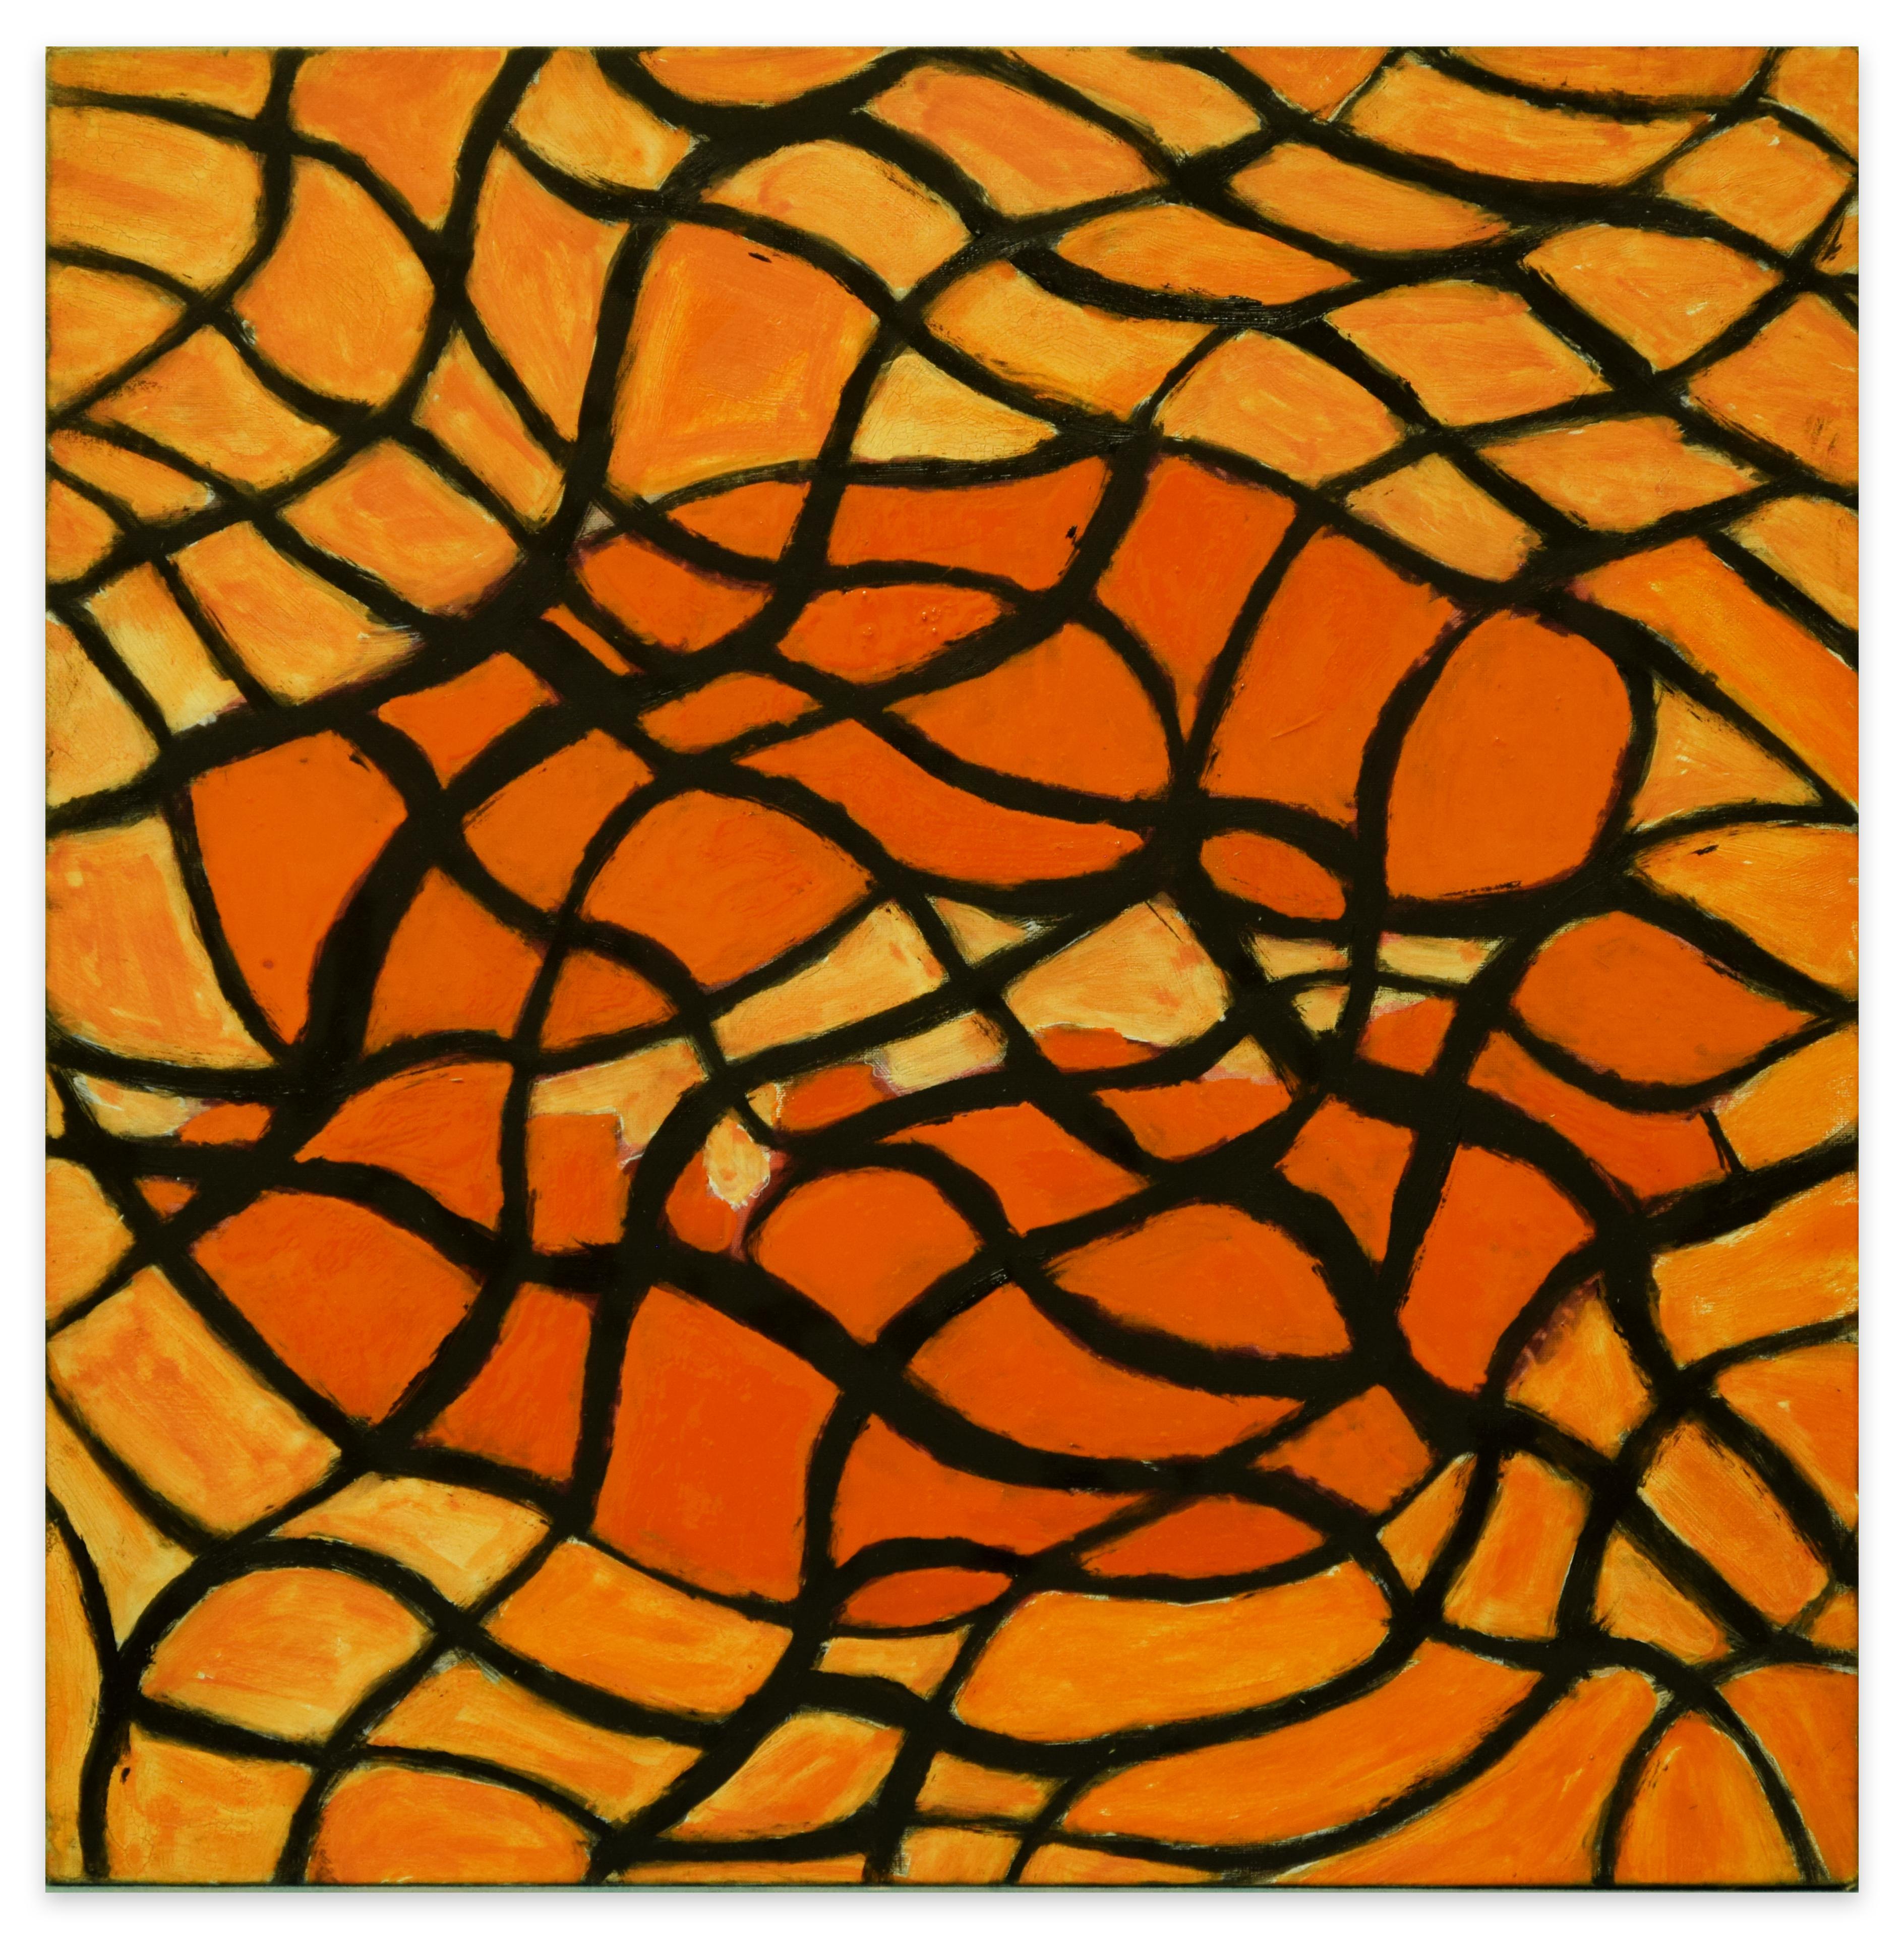 Reticulum is an original artwork realized by Giorgio Lo Fermo in 2019.

Original colored enamel on canvas.

Hand-signed and dated on the back.

The artwork is a beautiful abstract artwork representing a beautiful lattice on the tones of